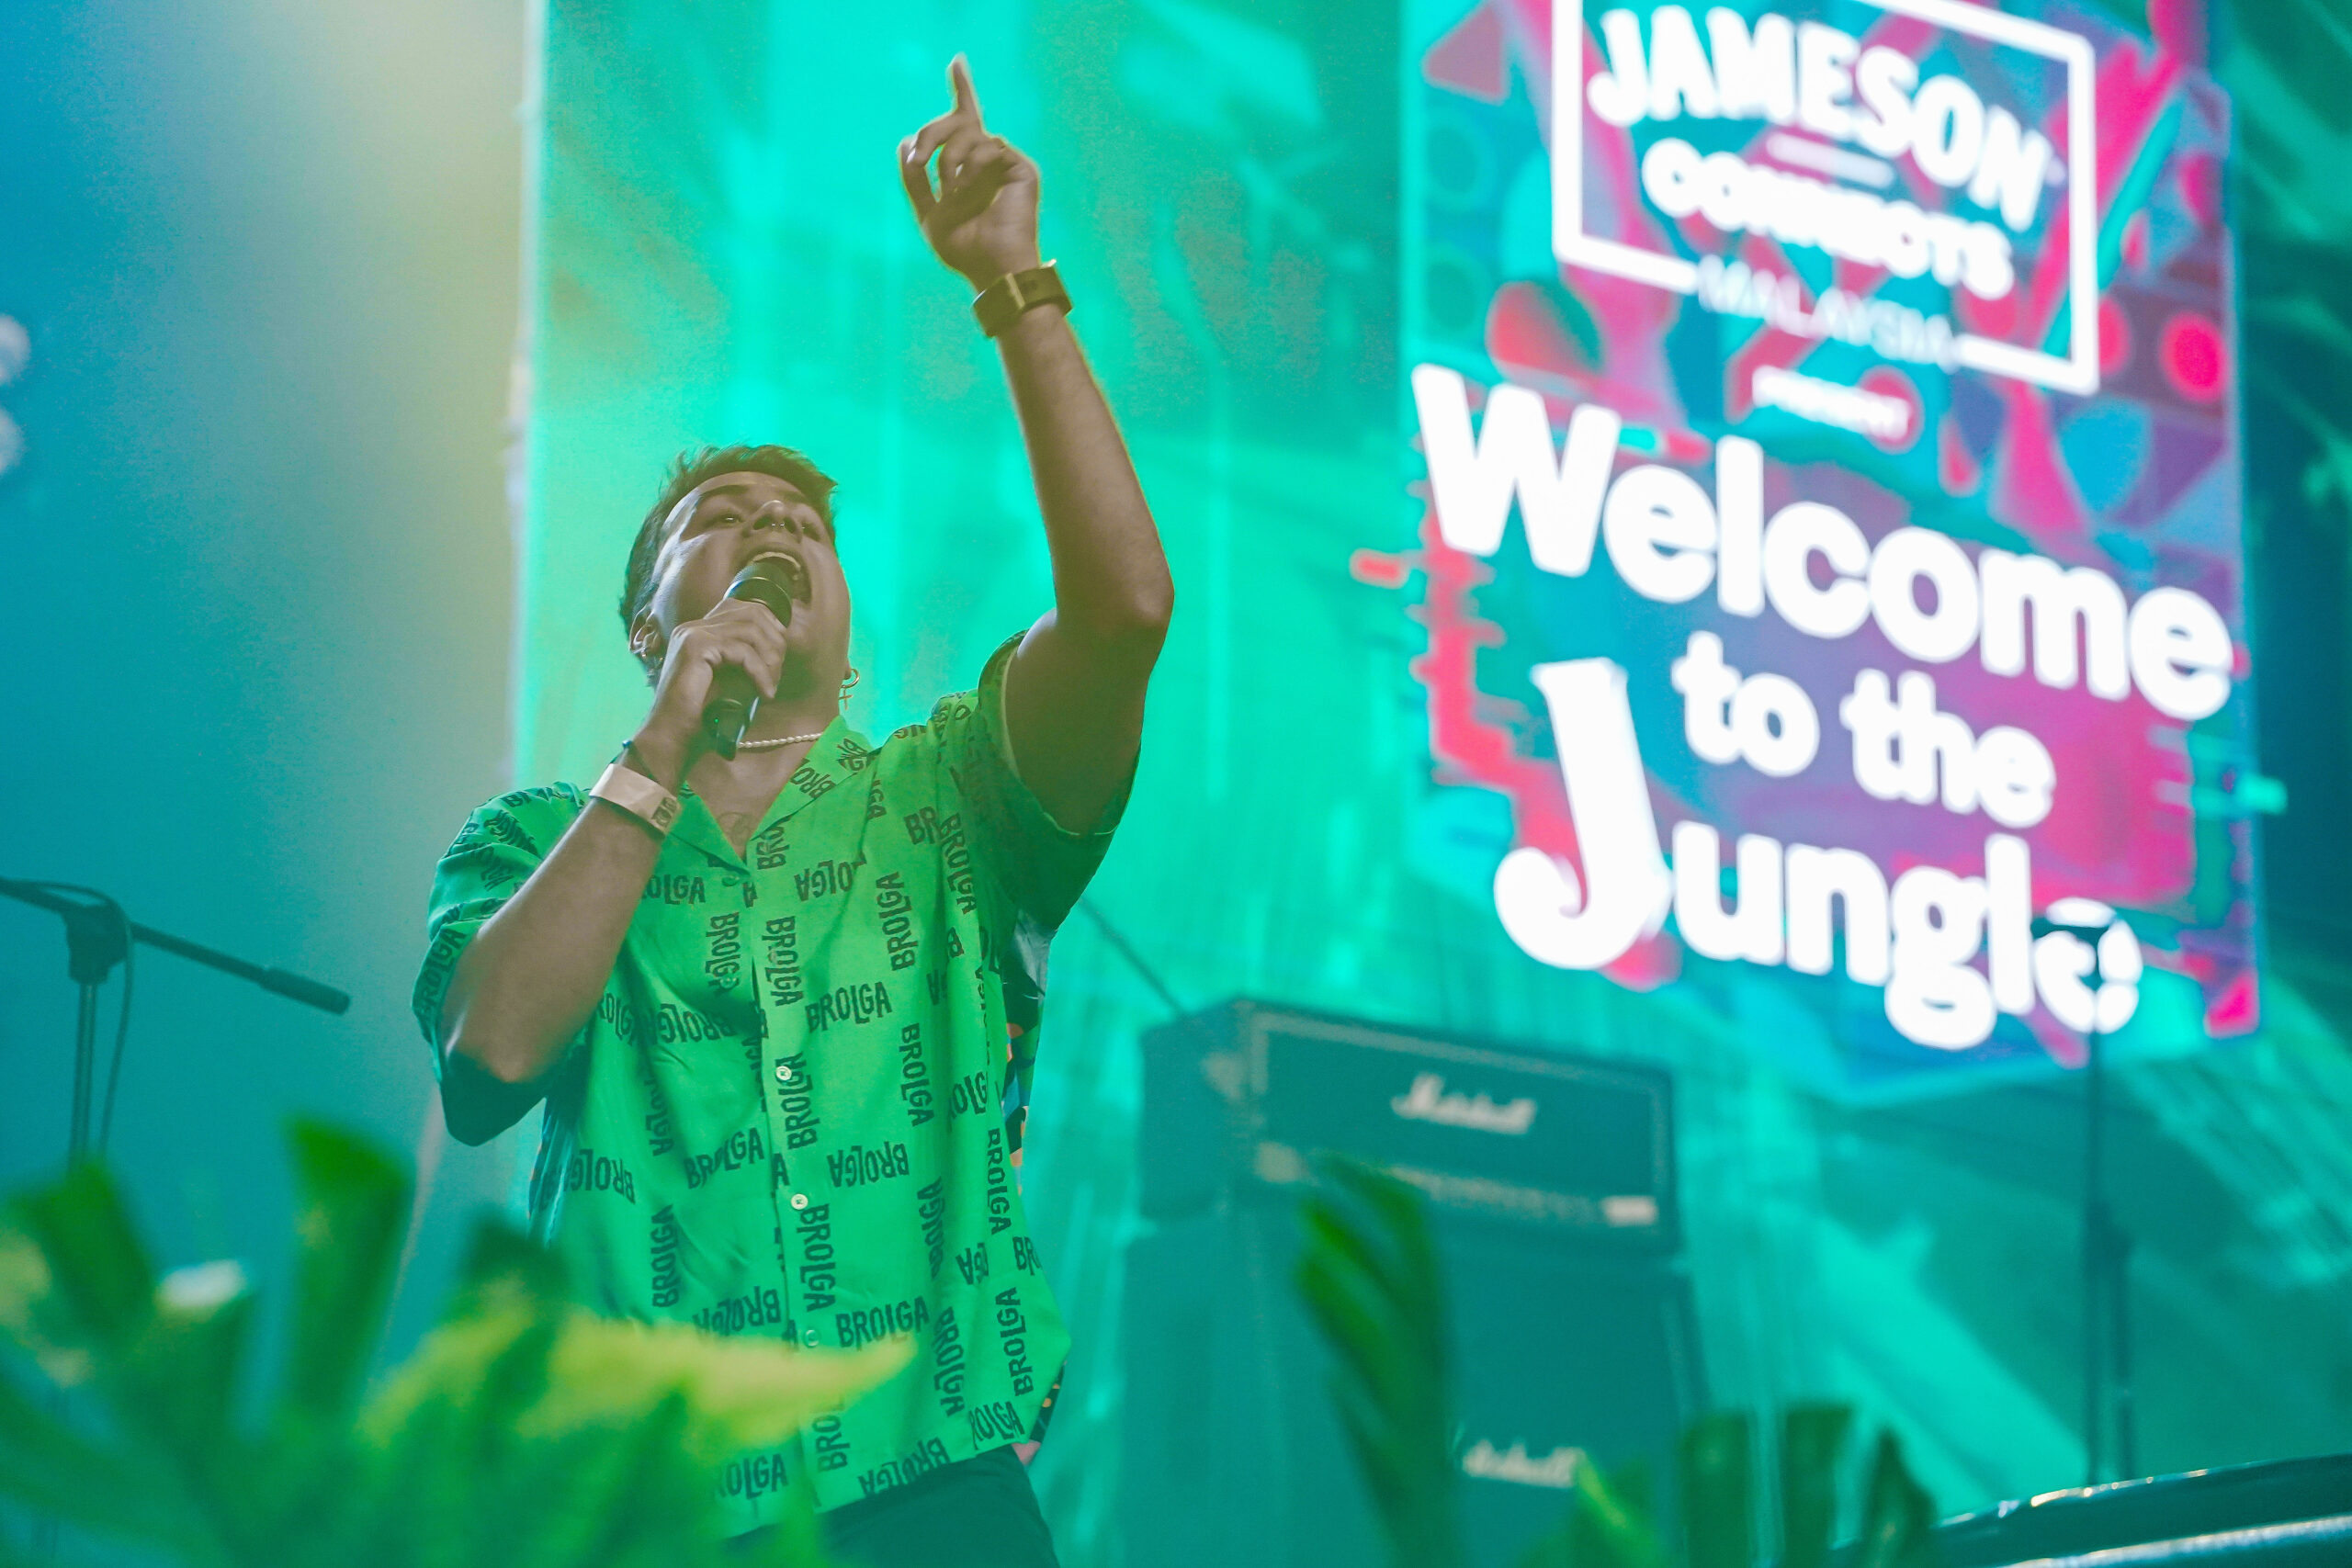 Gather your friends and widen your circle at jameson’s welcome to the jungle | weirdkaya